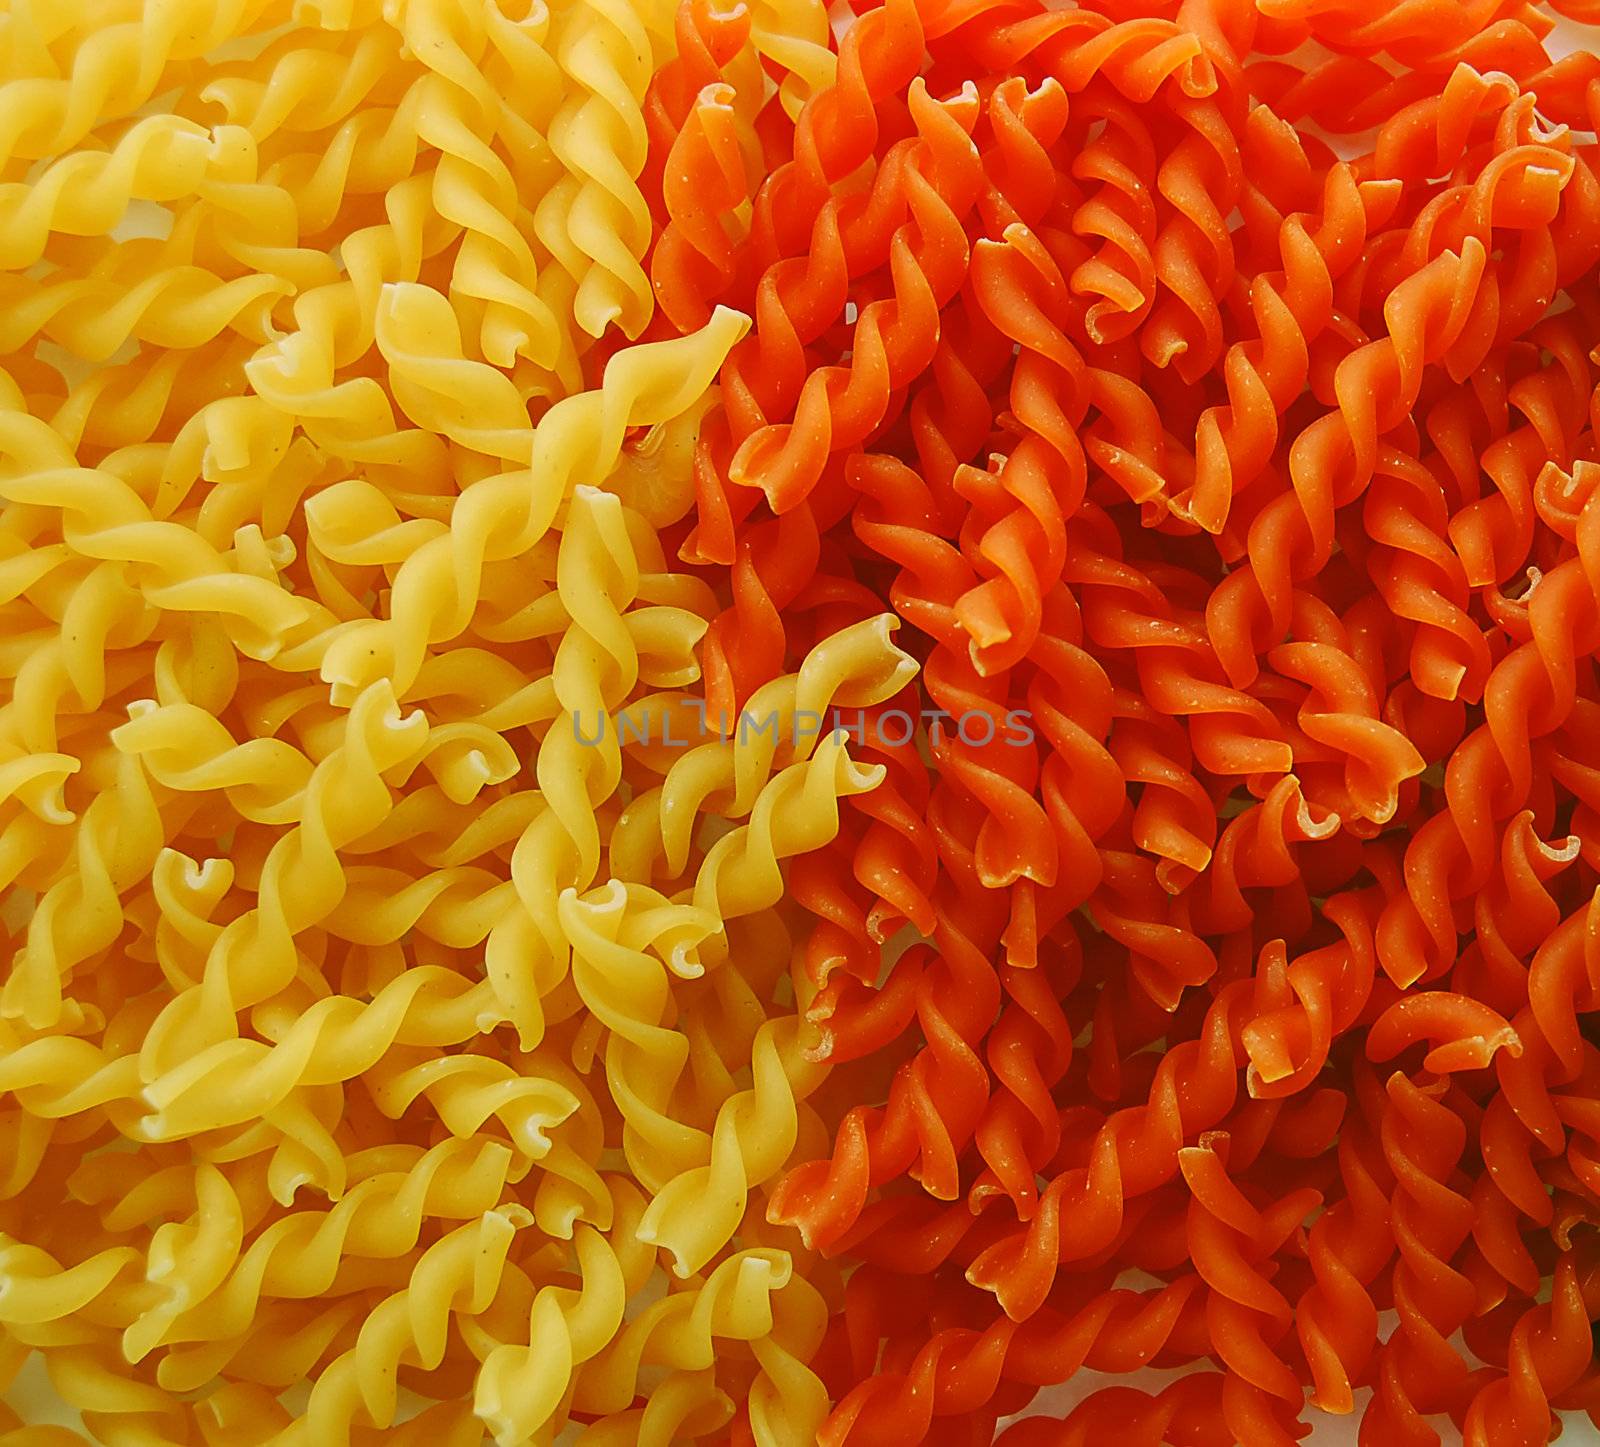 colored noodles by mettus